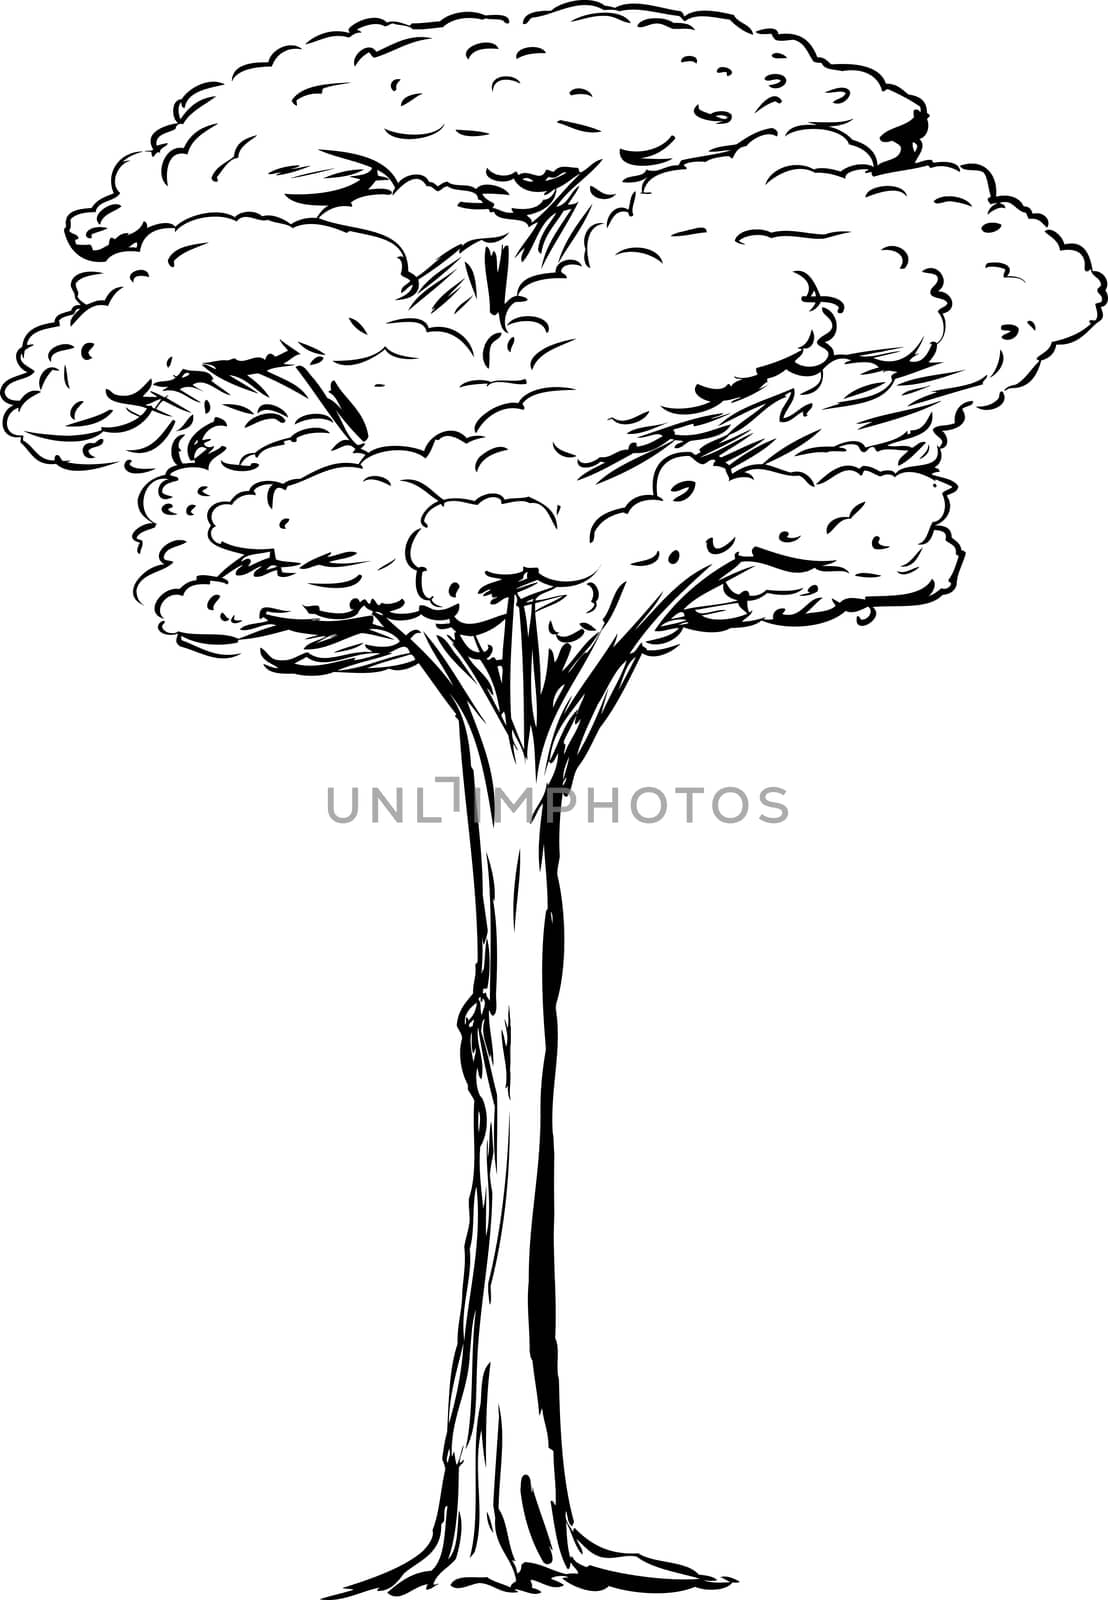 Outlined single tall tree over isolated white background